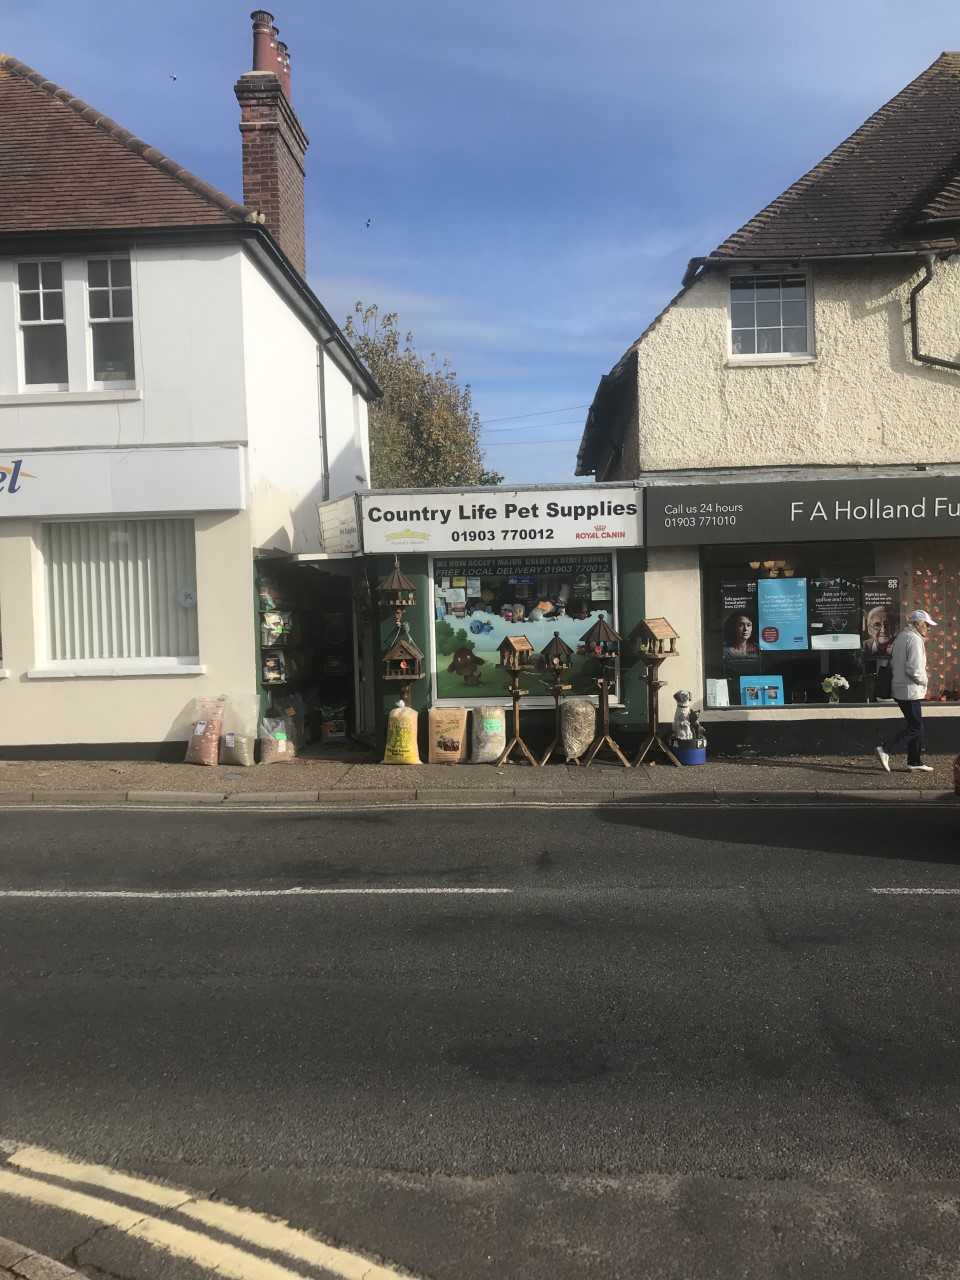 Country Life Pet Supplies in Rustington